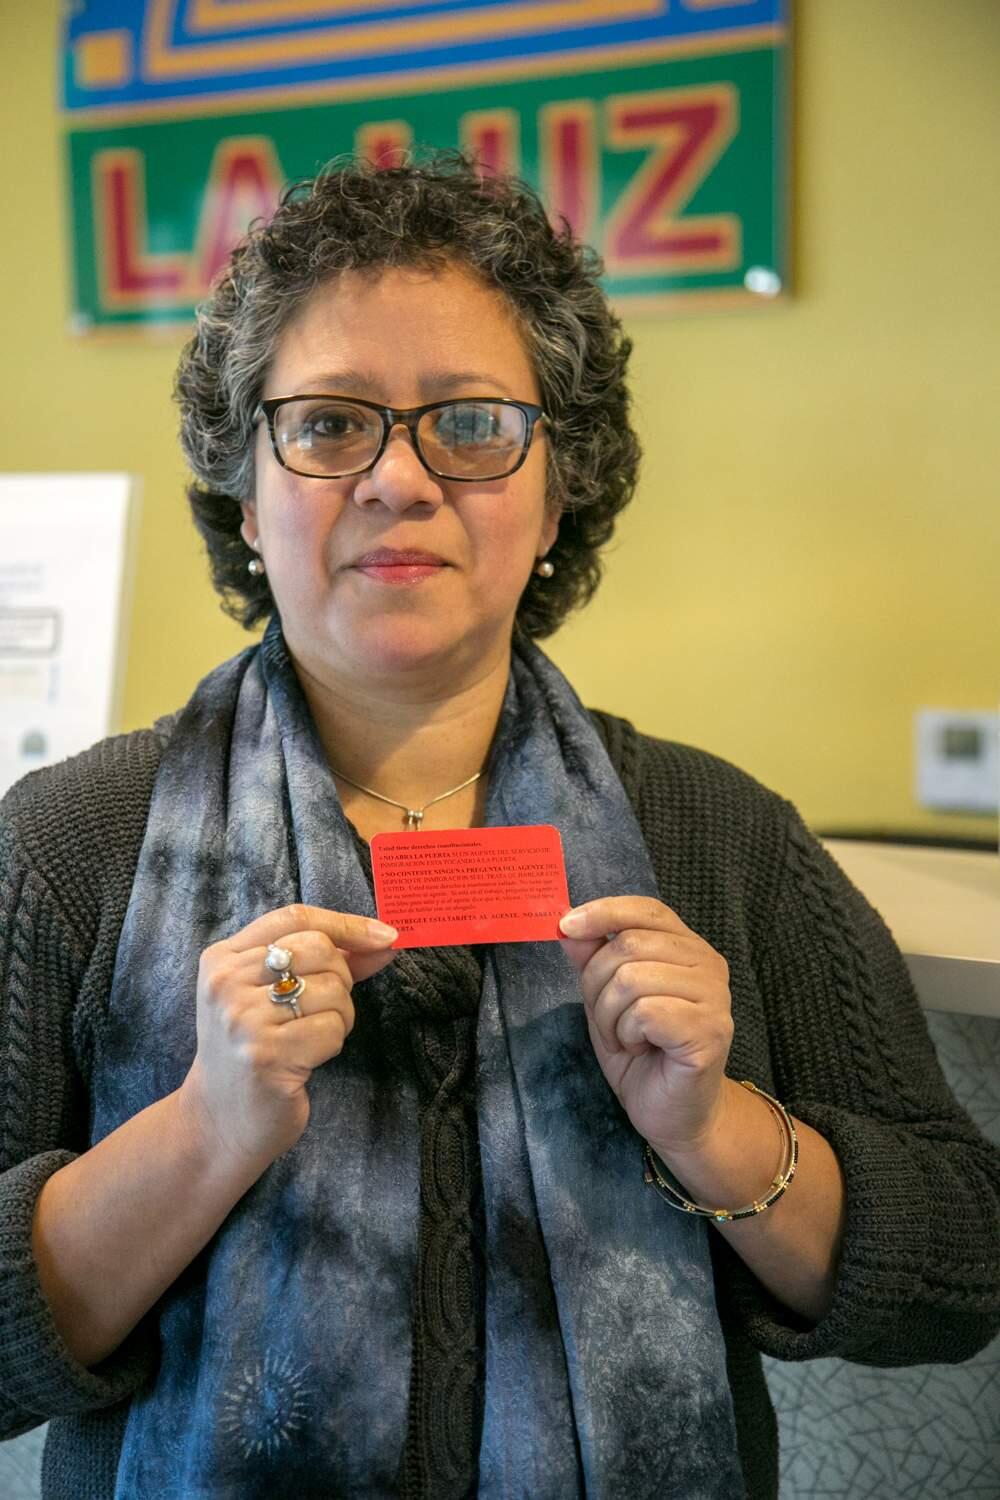 Patricia Galindo, Client Services Coordinator for La Luz Center, holds the red card explaining constitutional rights in English and Spanish, available at the center in Sonoma, Feb. 23, 2017. (Photo by Julie Vader/Special to the Index-Tribune)